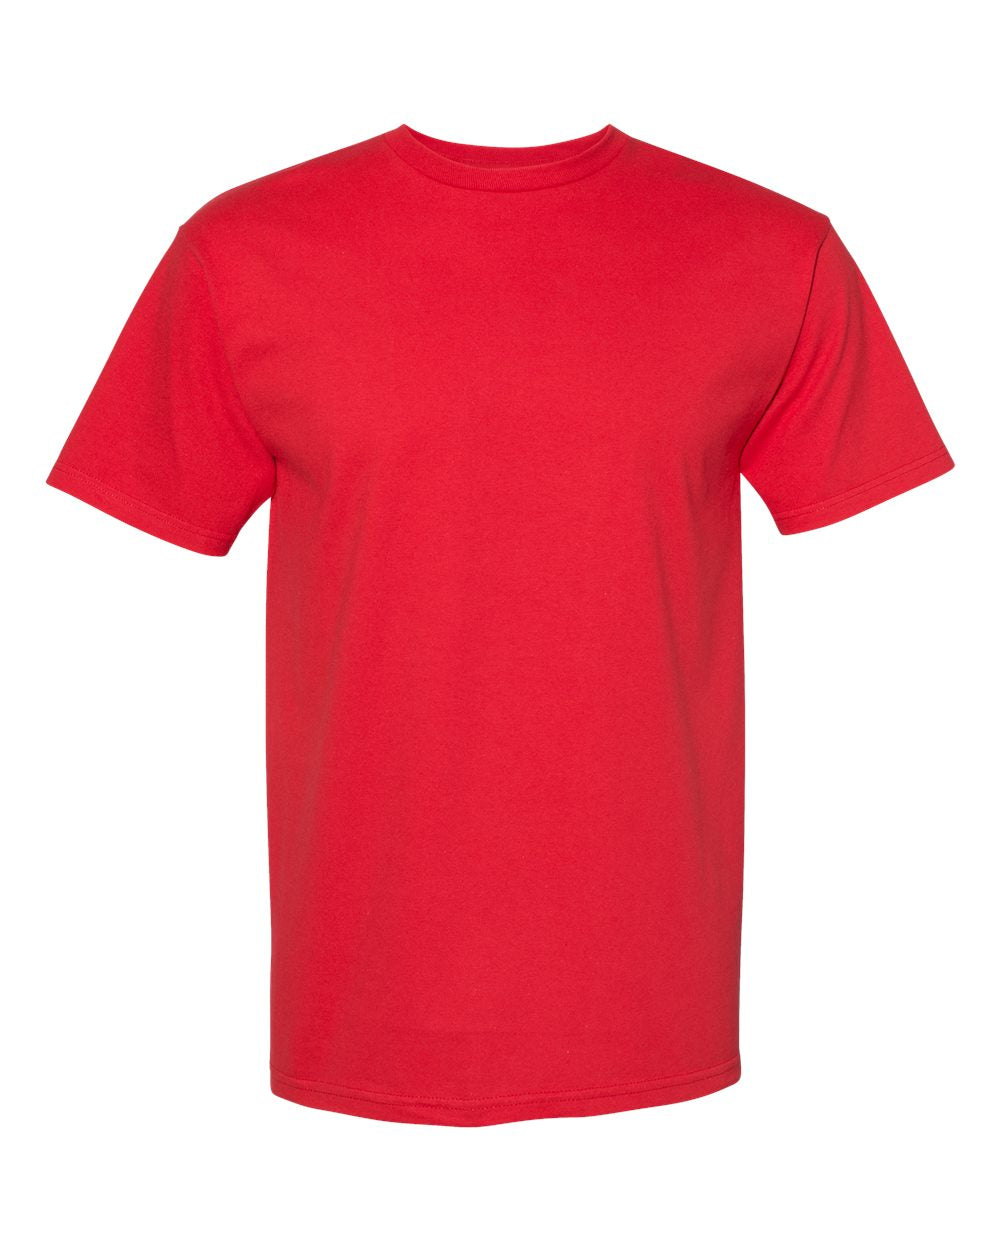 American Apparel Midweight Cotton Unisex Tee 1701 #color_Red